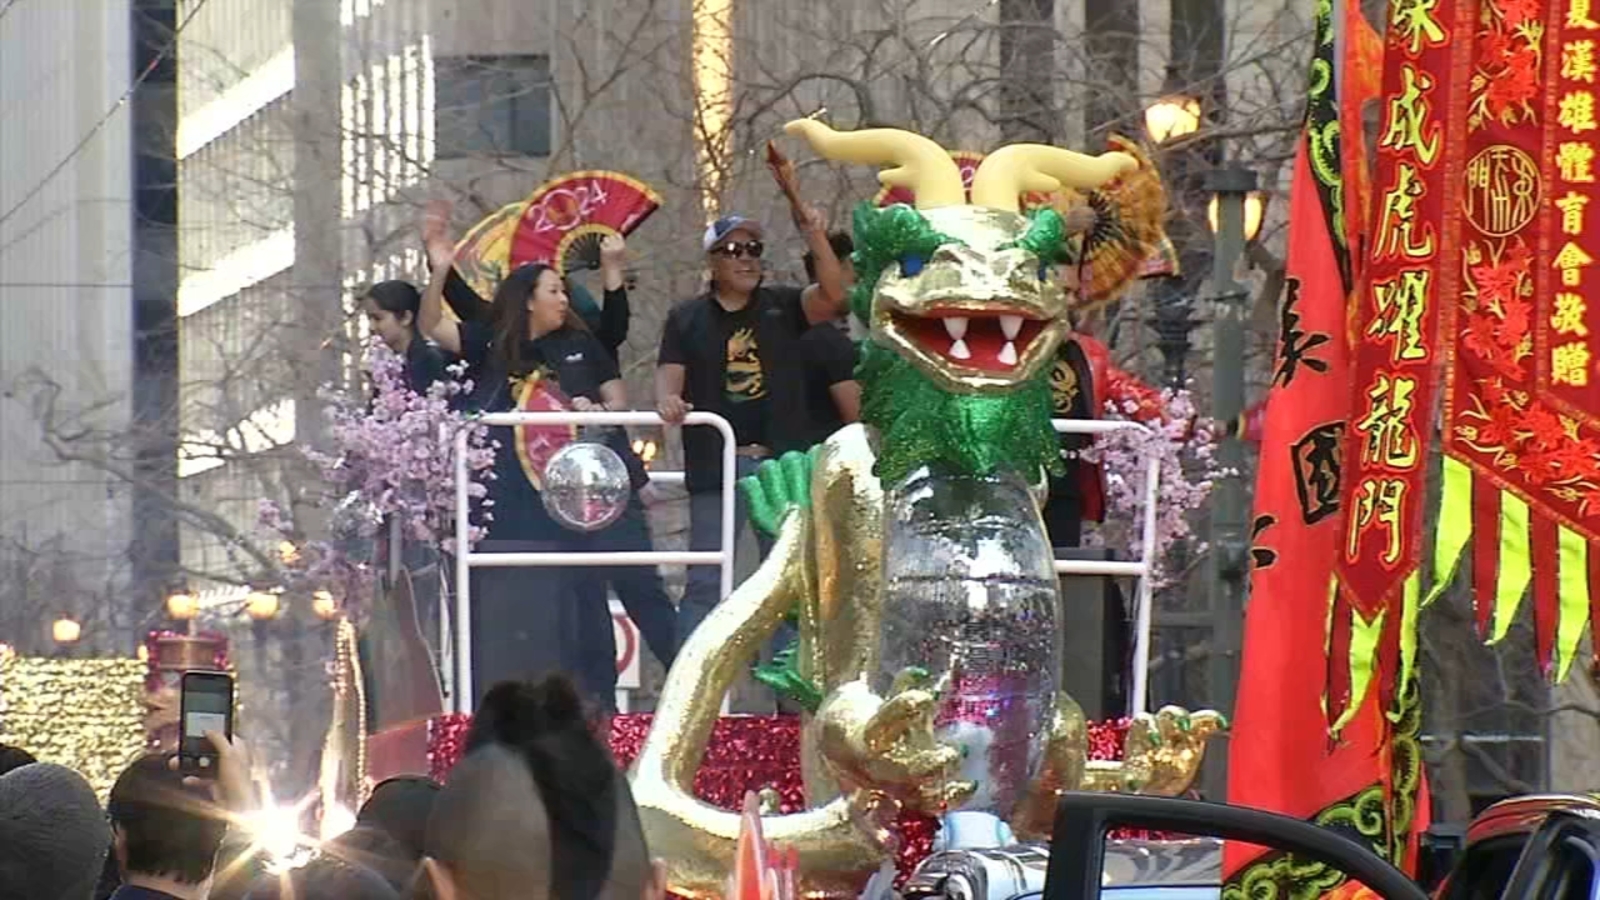 Thousands gather for annual Chinese New year Parade and Festival in